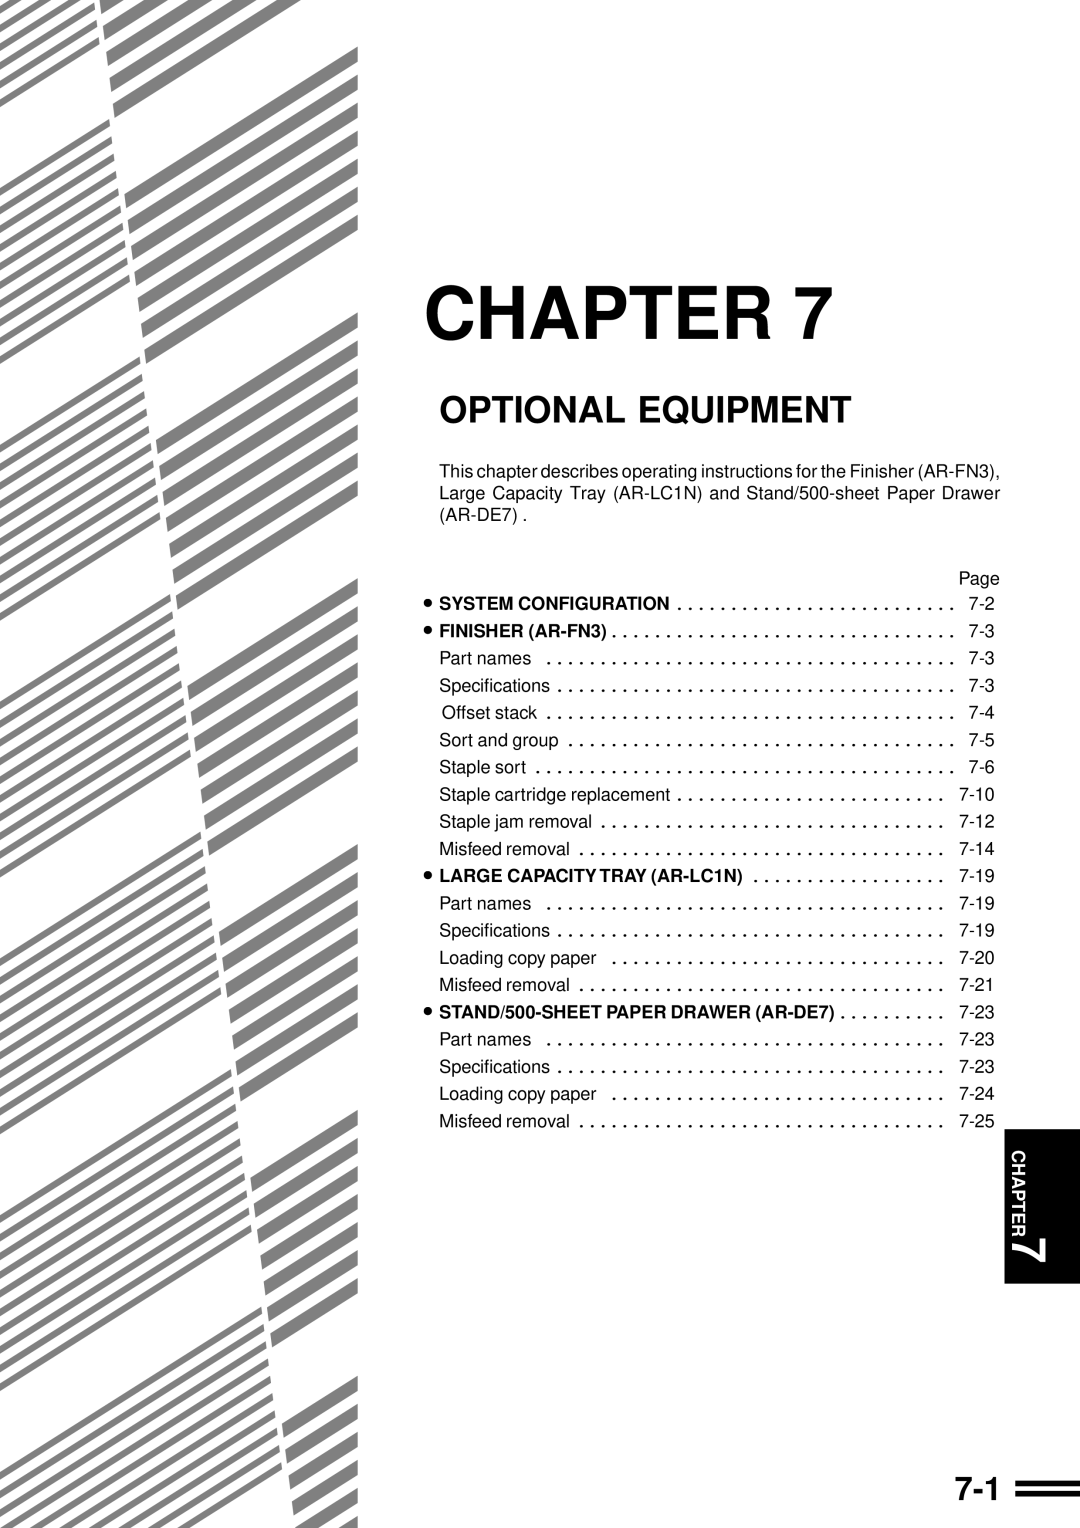 Sharp AR-507 Optional Equipment, Chapter, System Configuration, FINISHER AR-FN3, LARGE CAPACITY TRAY AR-LC1N 